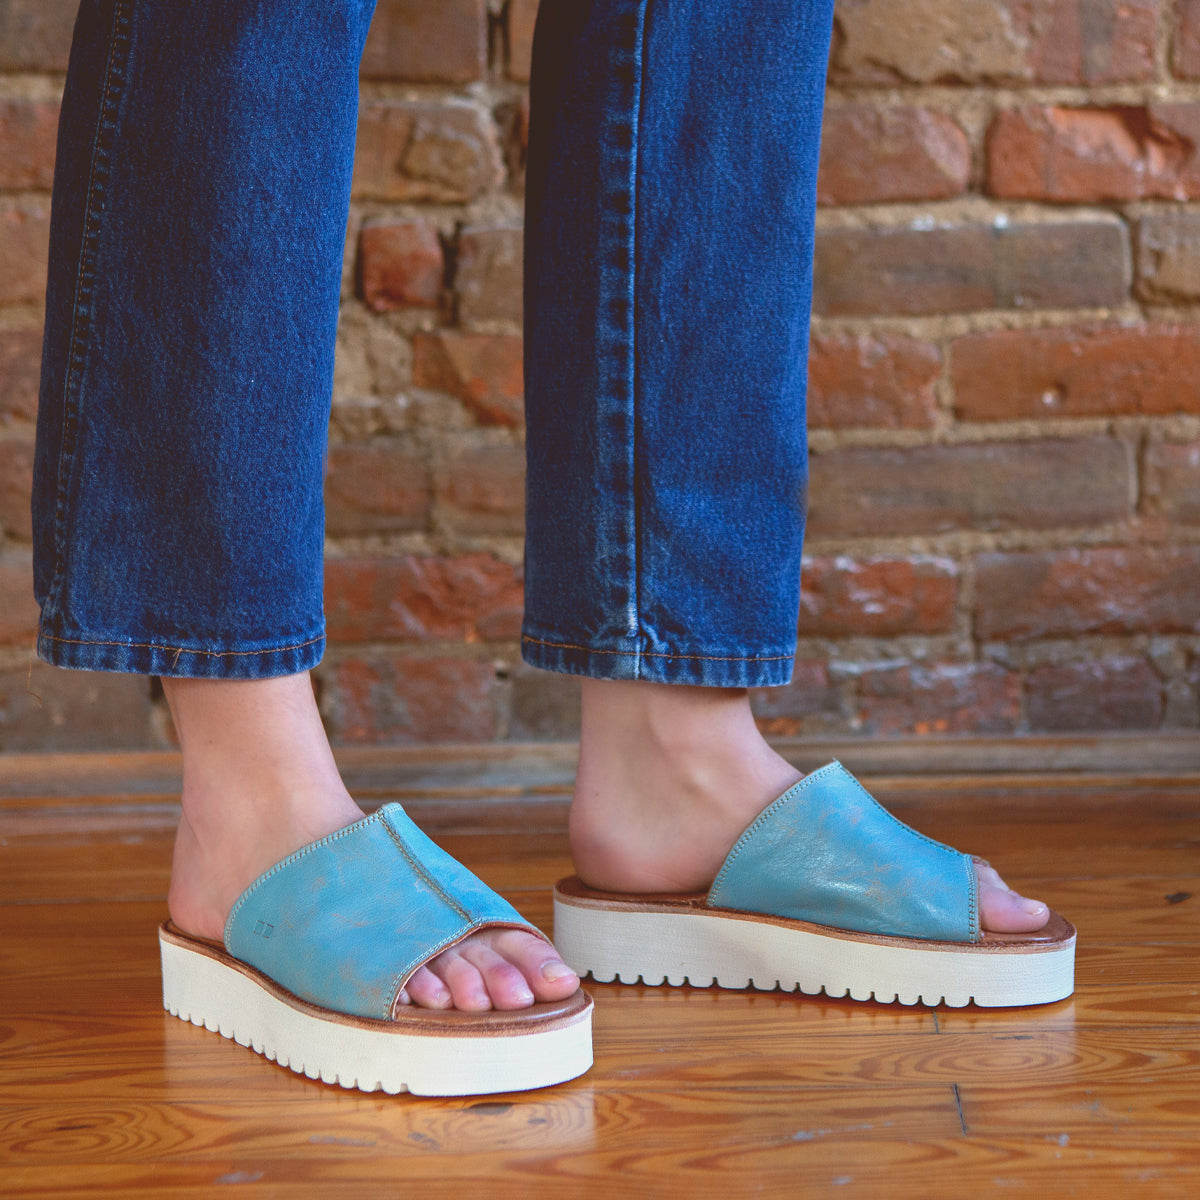 A person wearing stylish blue Fairlee II leather slide sandals from Bed Stu.